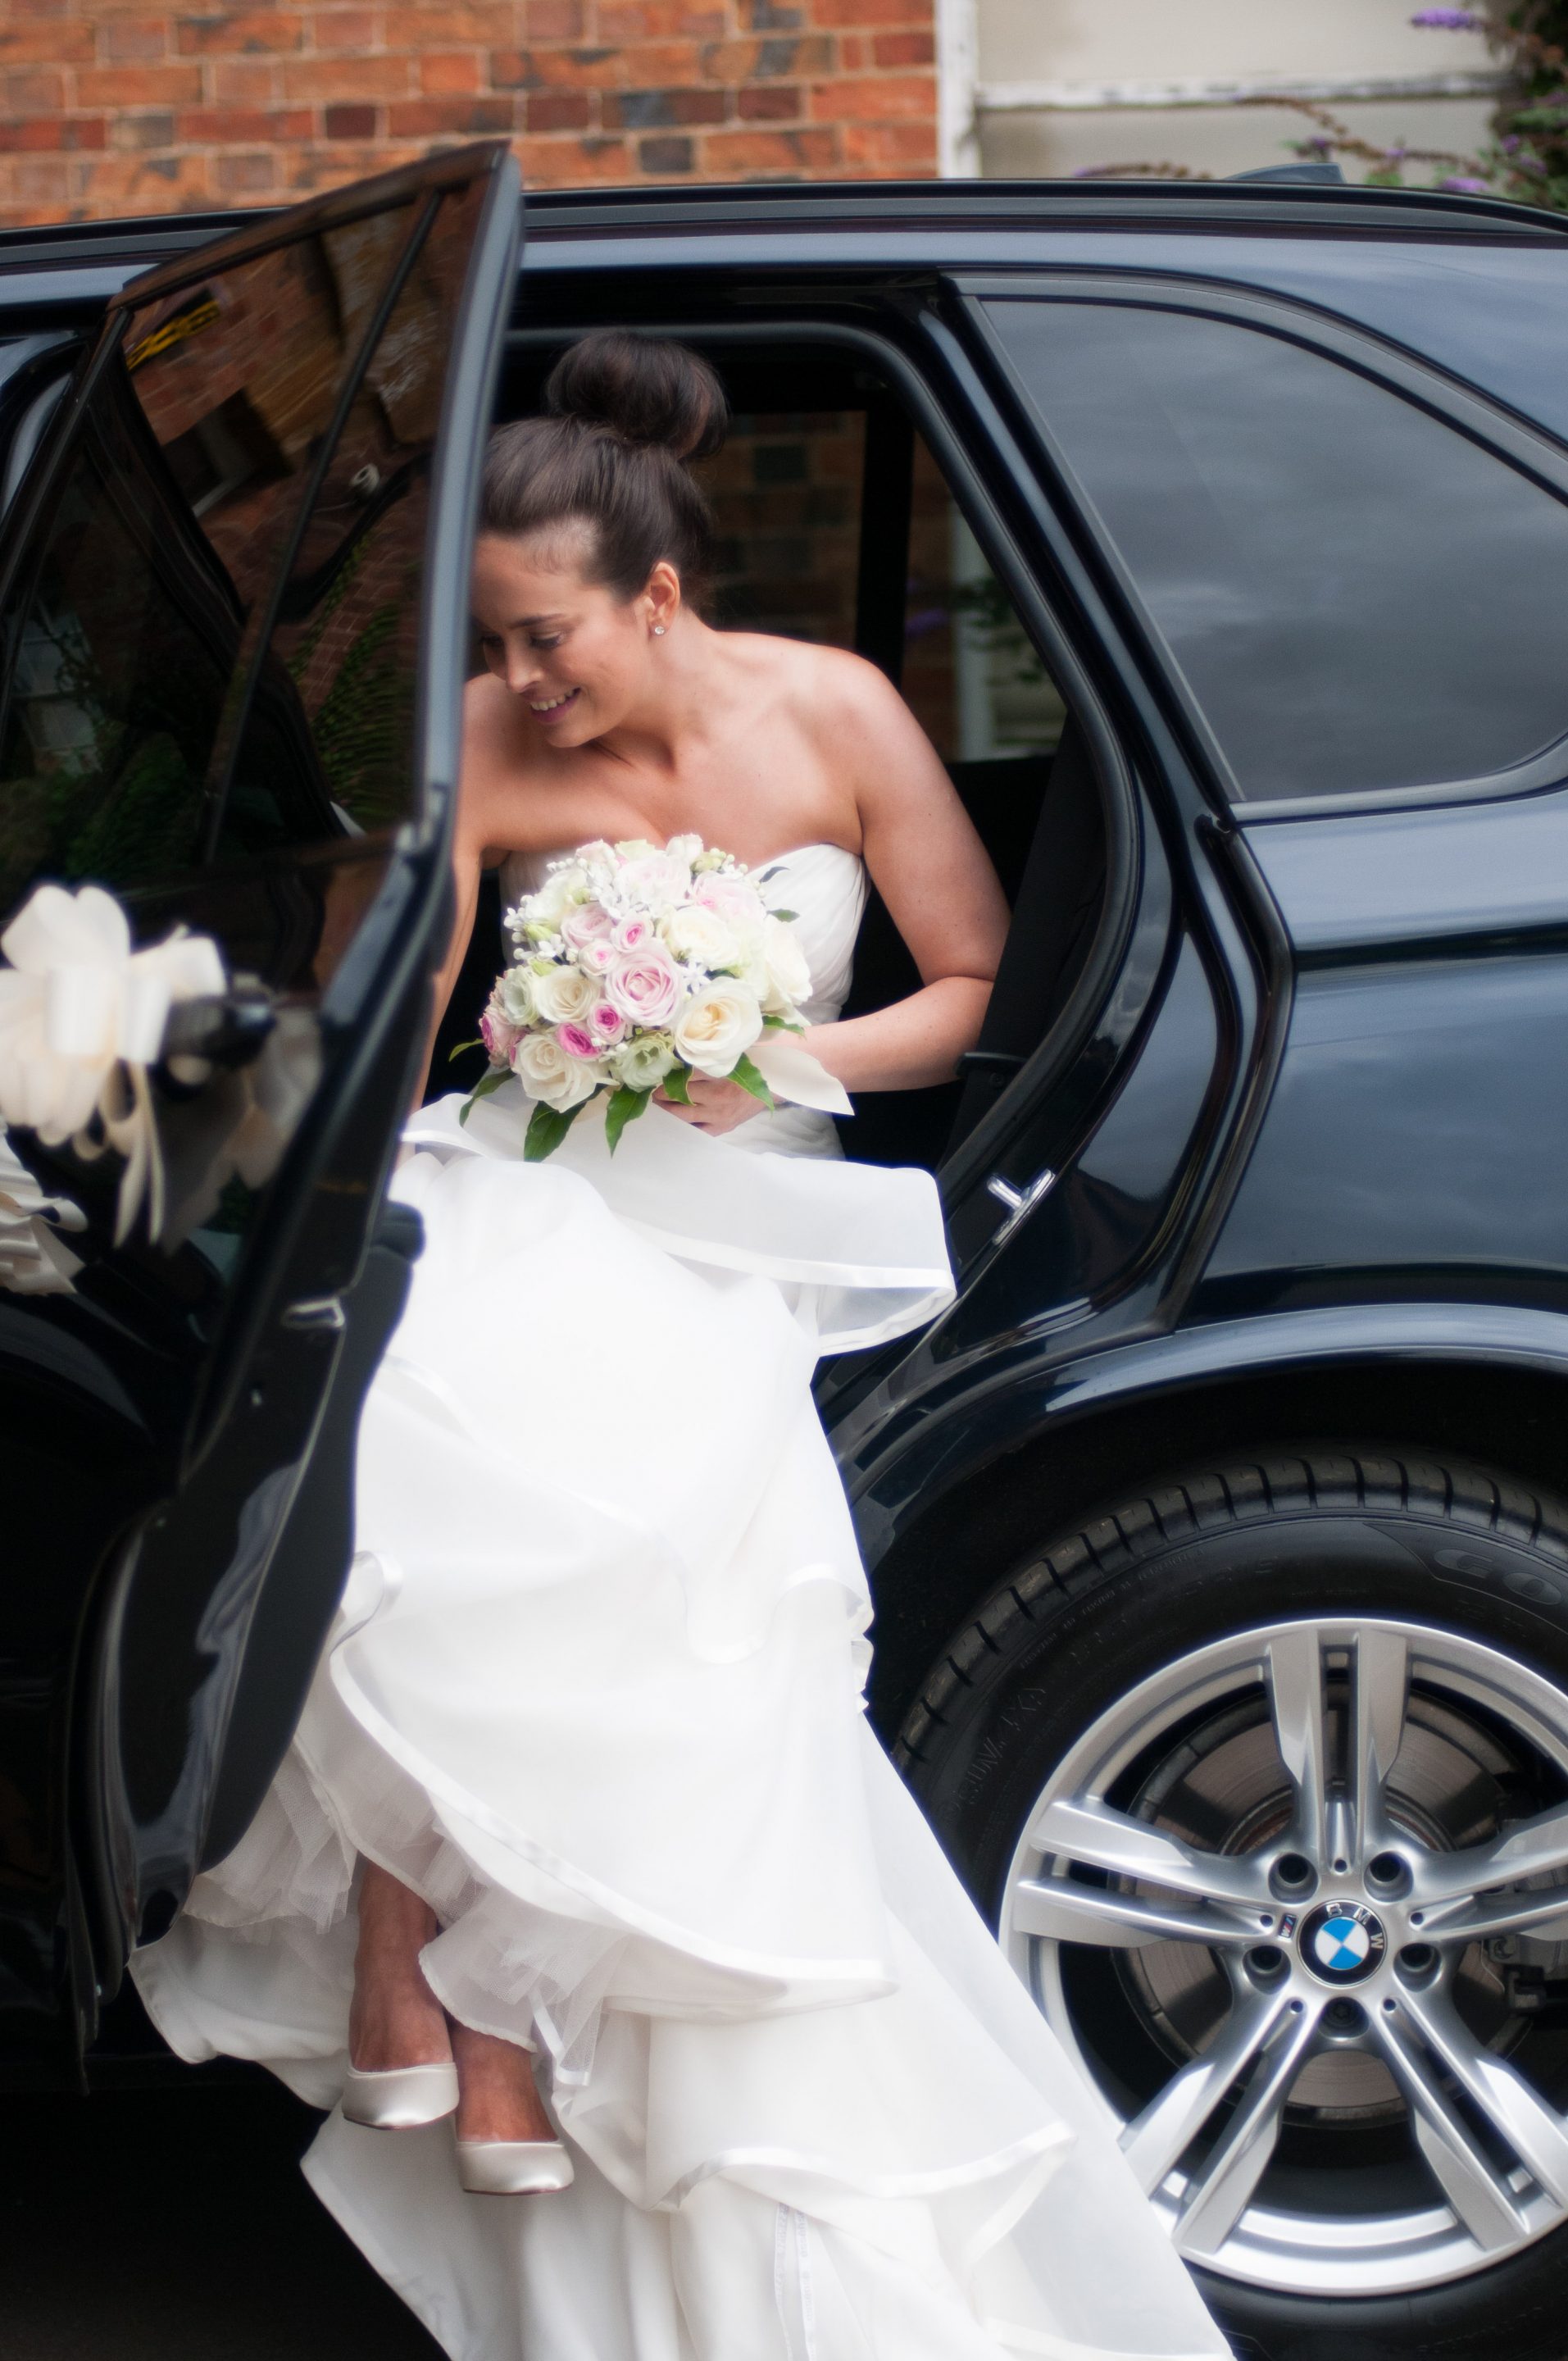 Bride arrives in the car